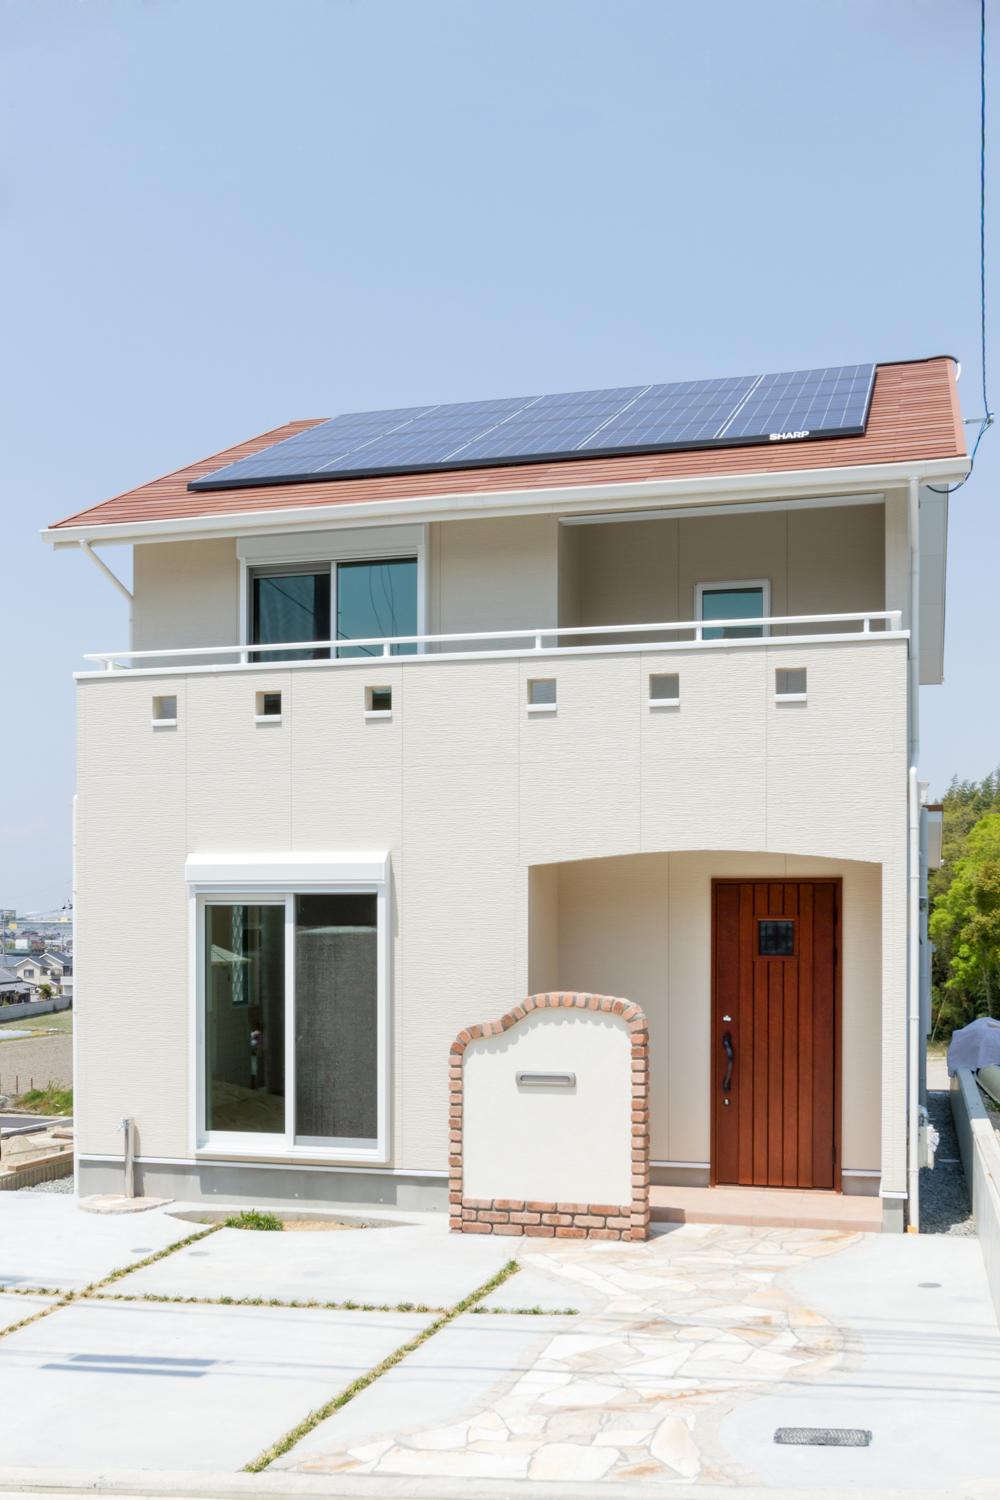 Model house photo.  [Appearance construction case] Large solar panel equipment (manufactured by SHARP). Sunny compartment on a sunny day.